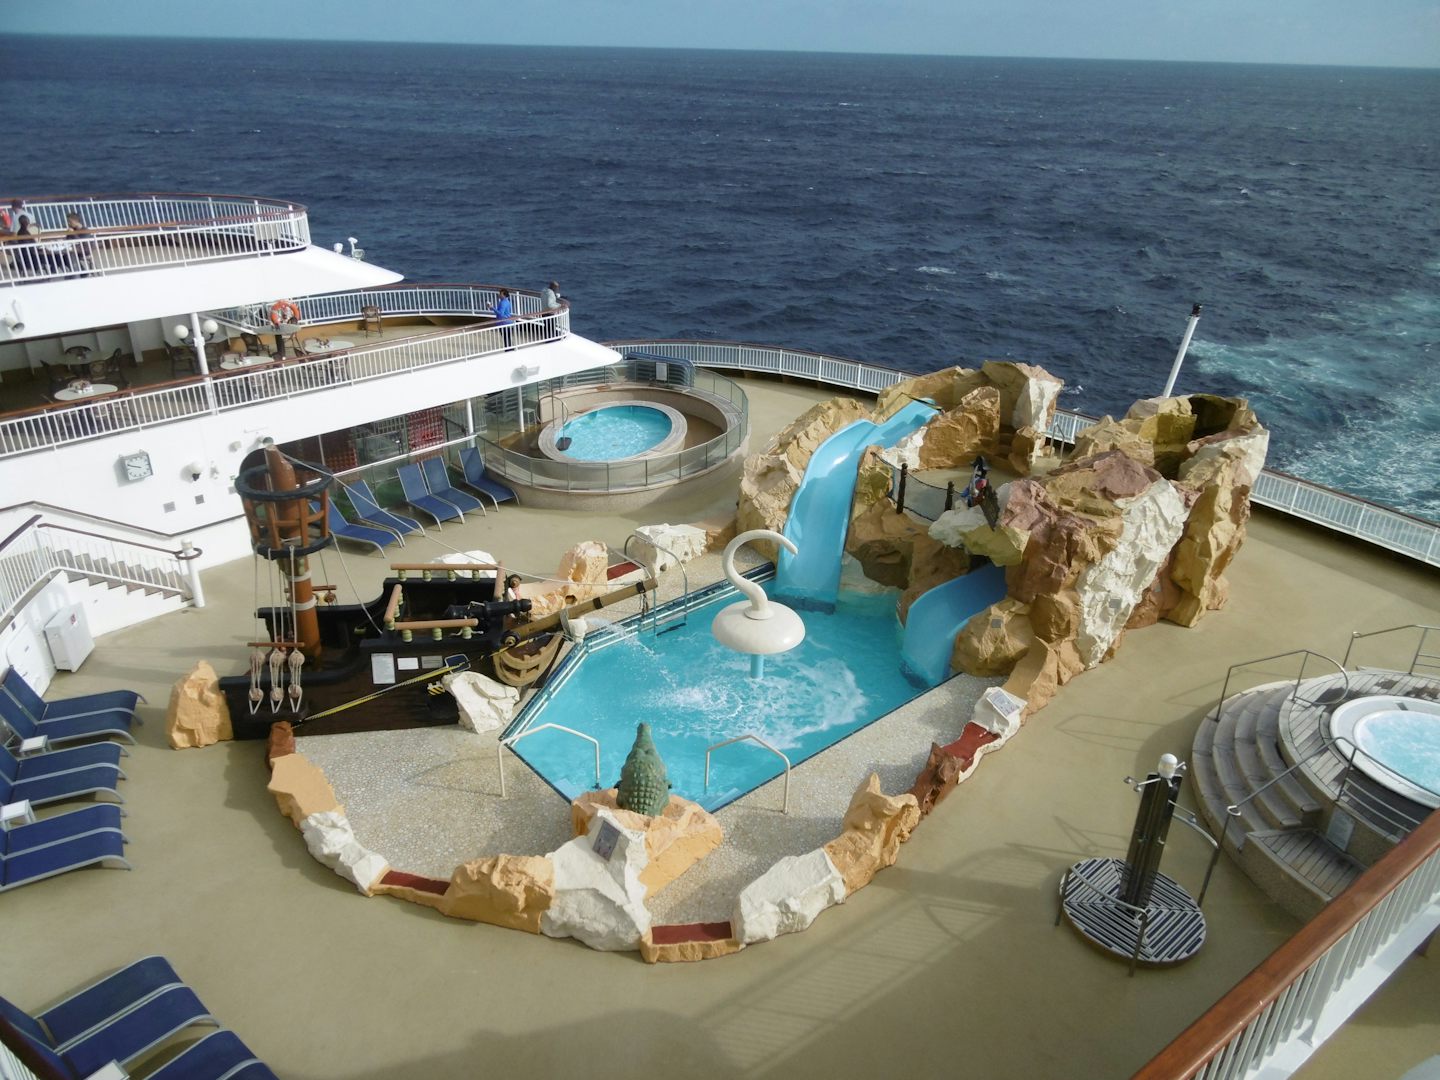 Kids pool at the back (aft) of the ship